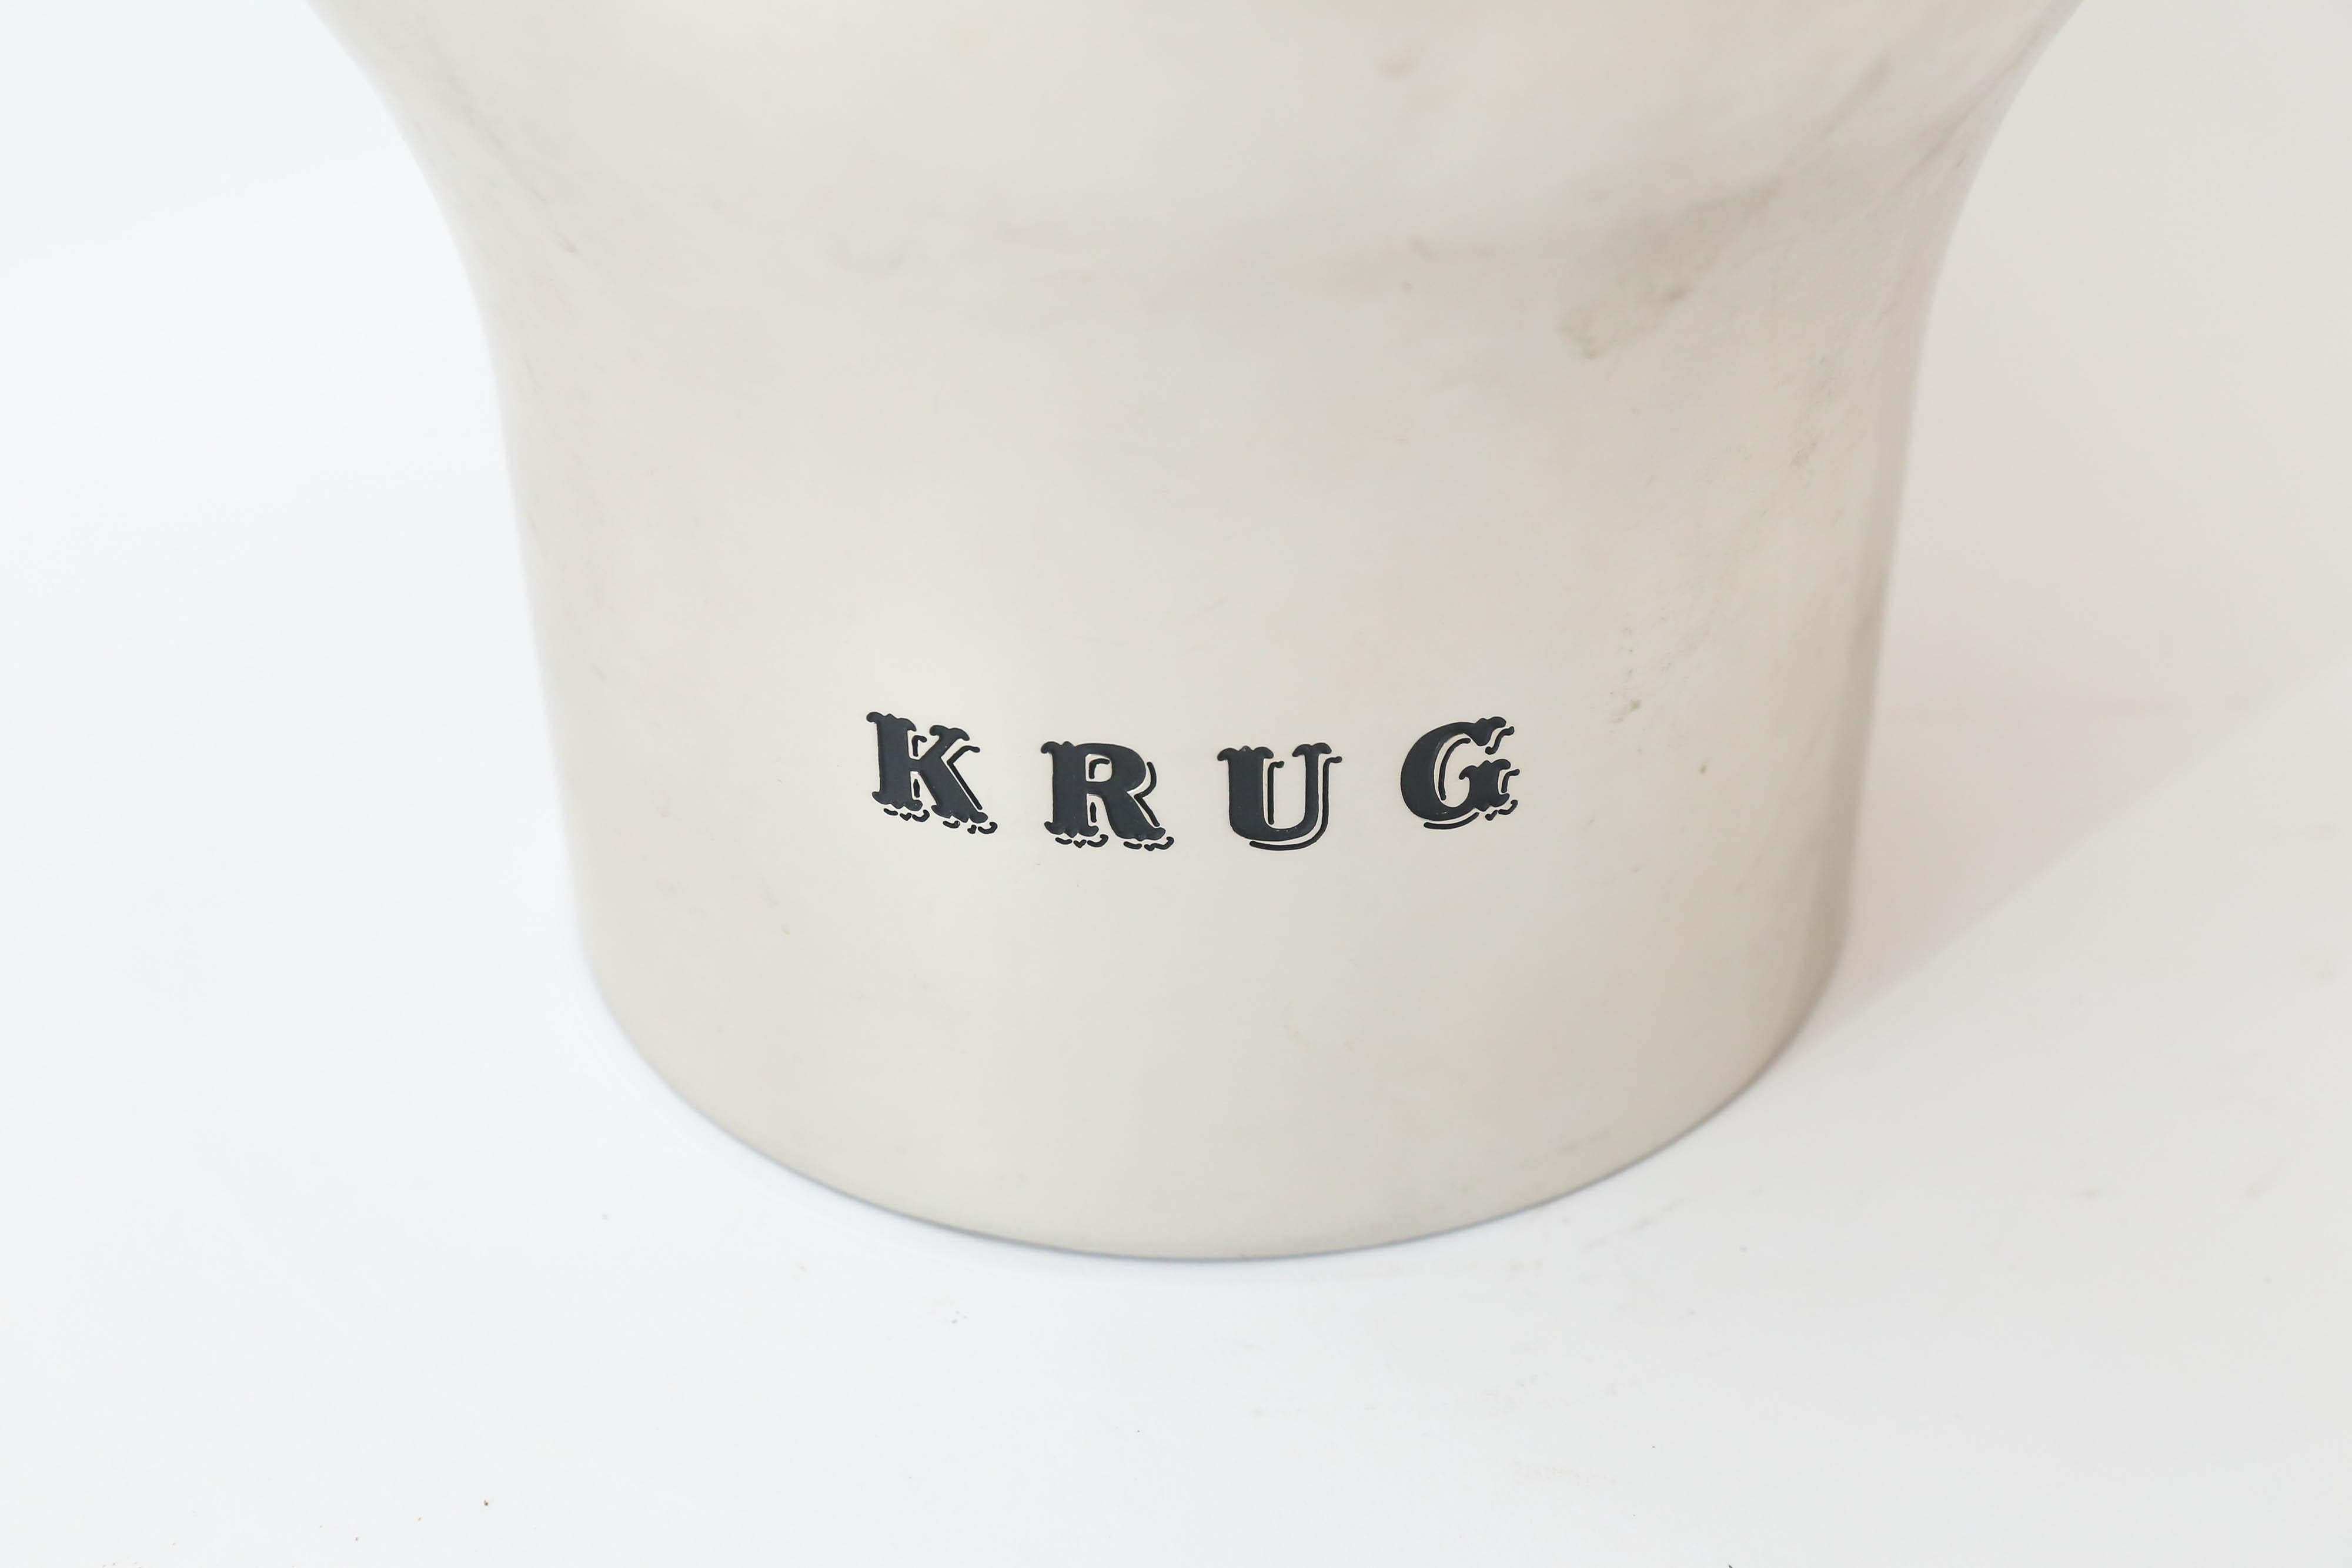 A fabulous cooler from the house of Krug to hold and chill your champagne or other wines. Designed by Francois Bauchet and featuring his signature on the underside. A lovely piece to use and display in your bar.